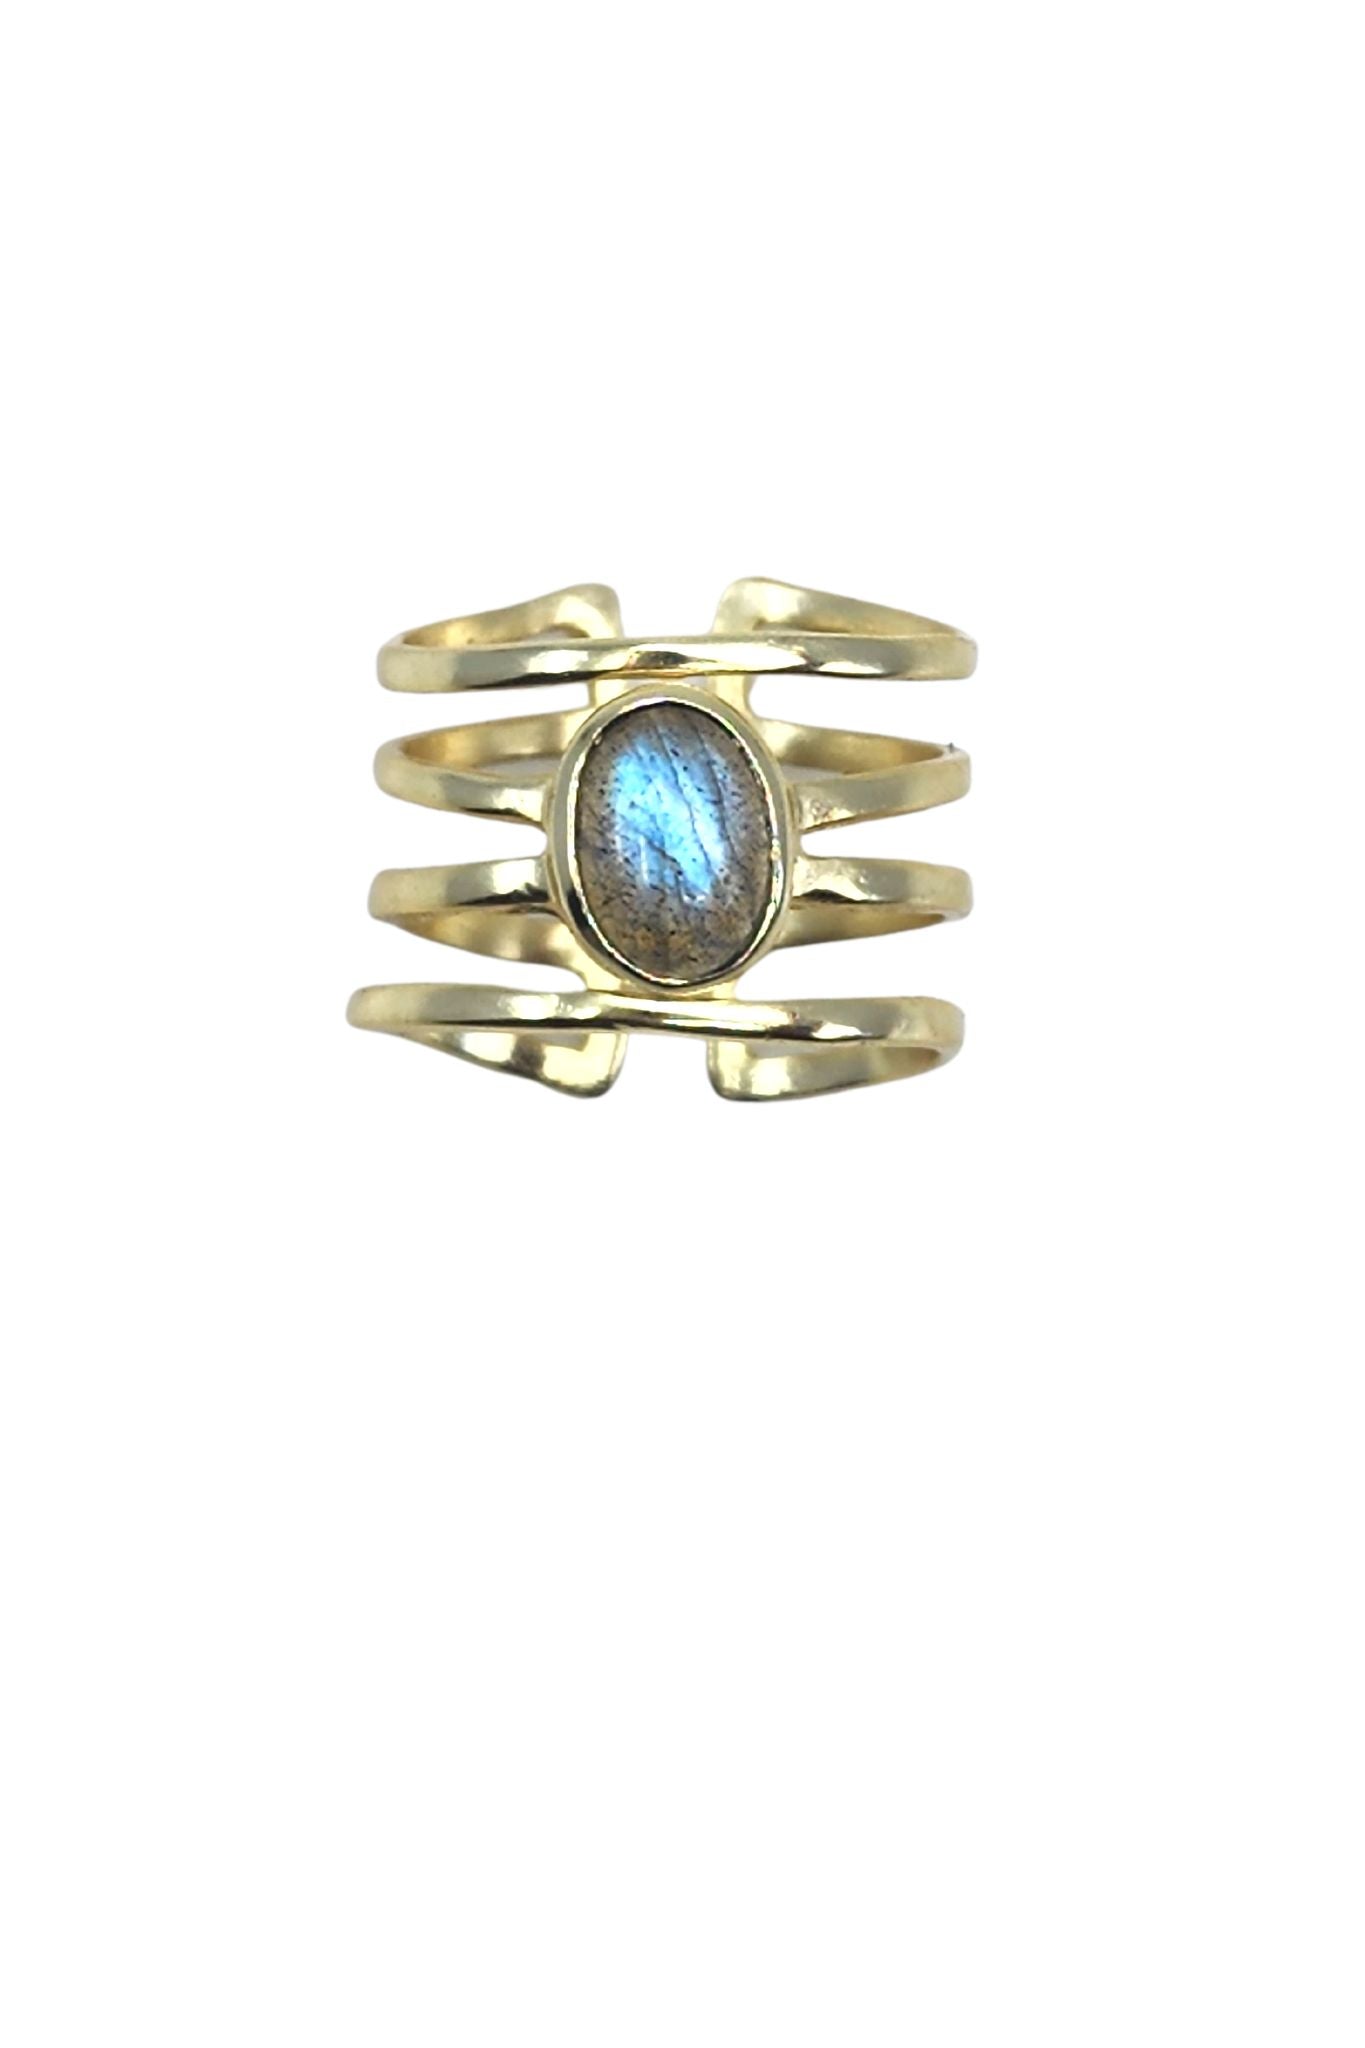 Labradorite Stone with Fancy Band